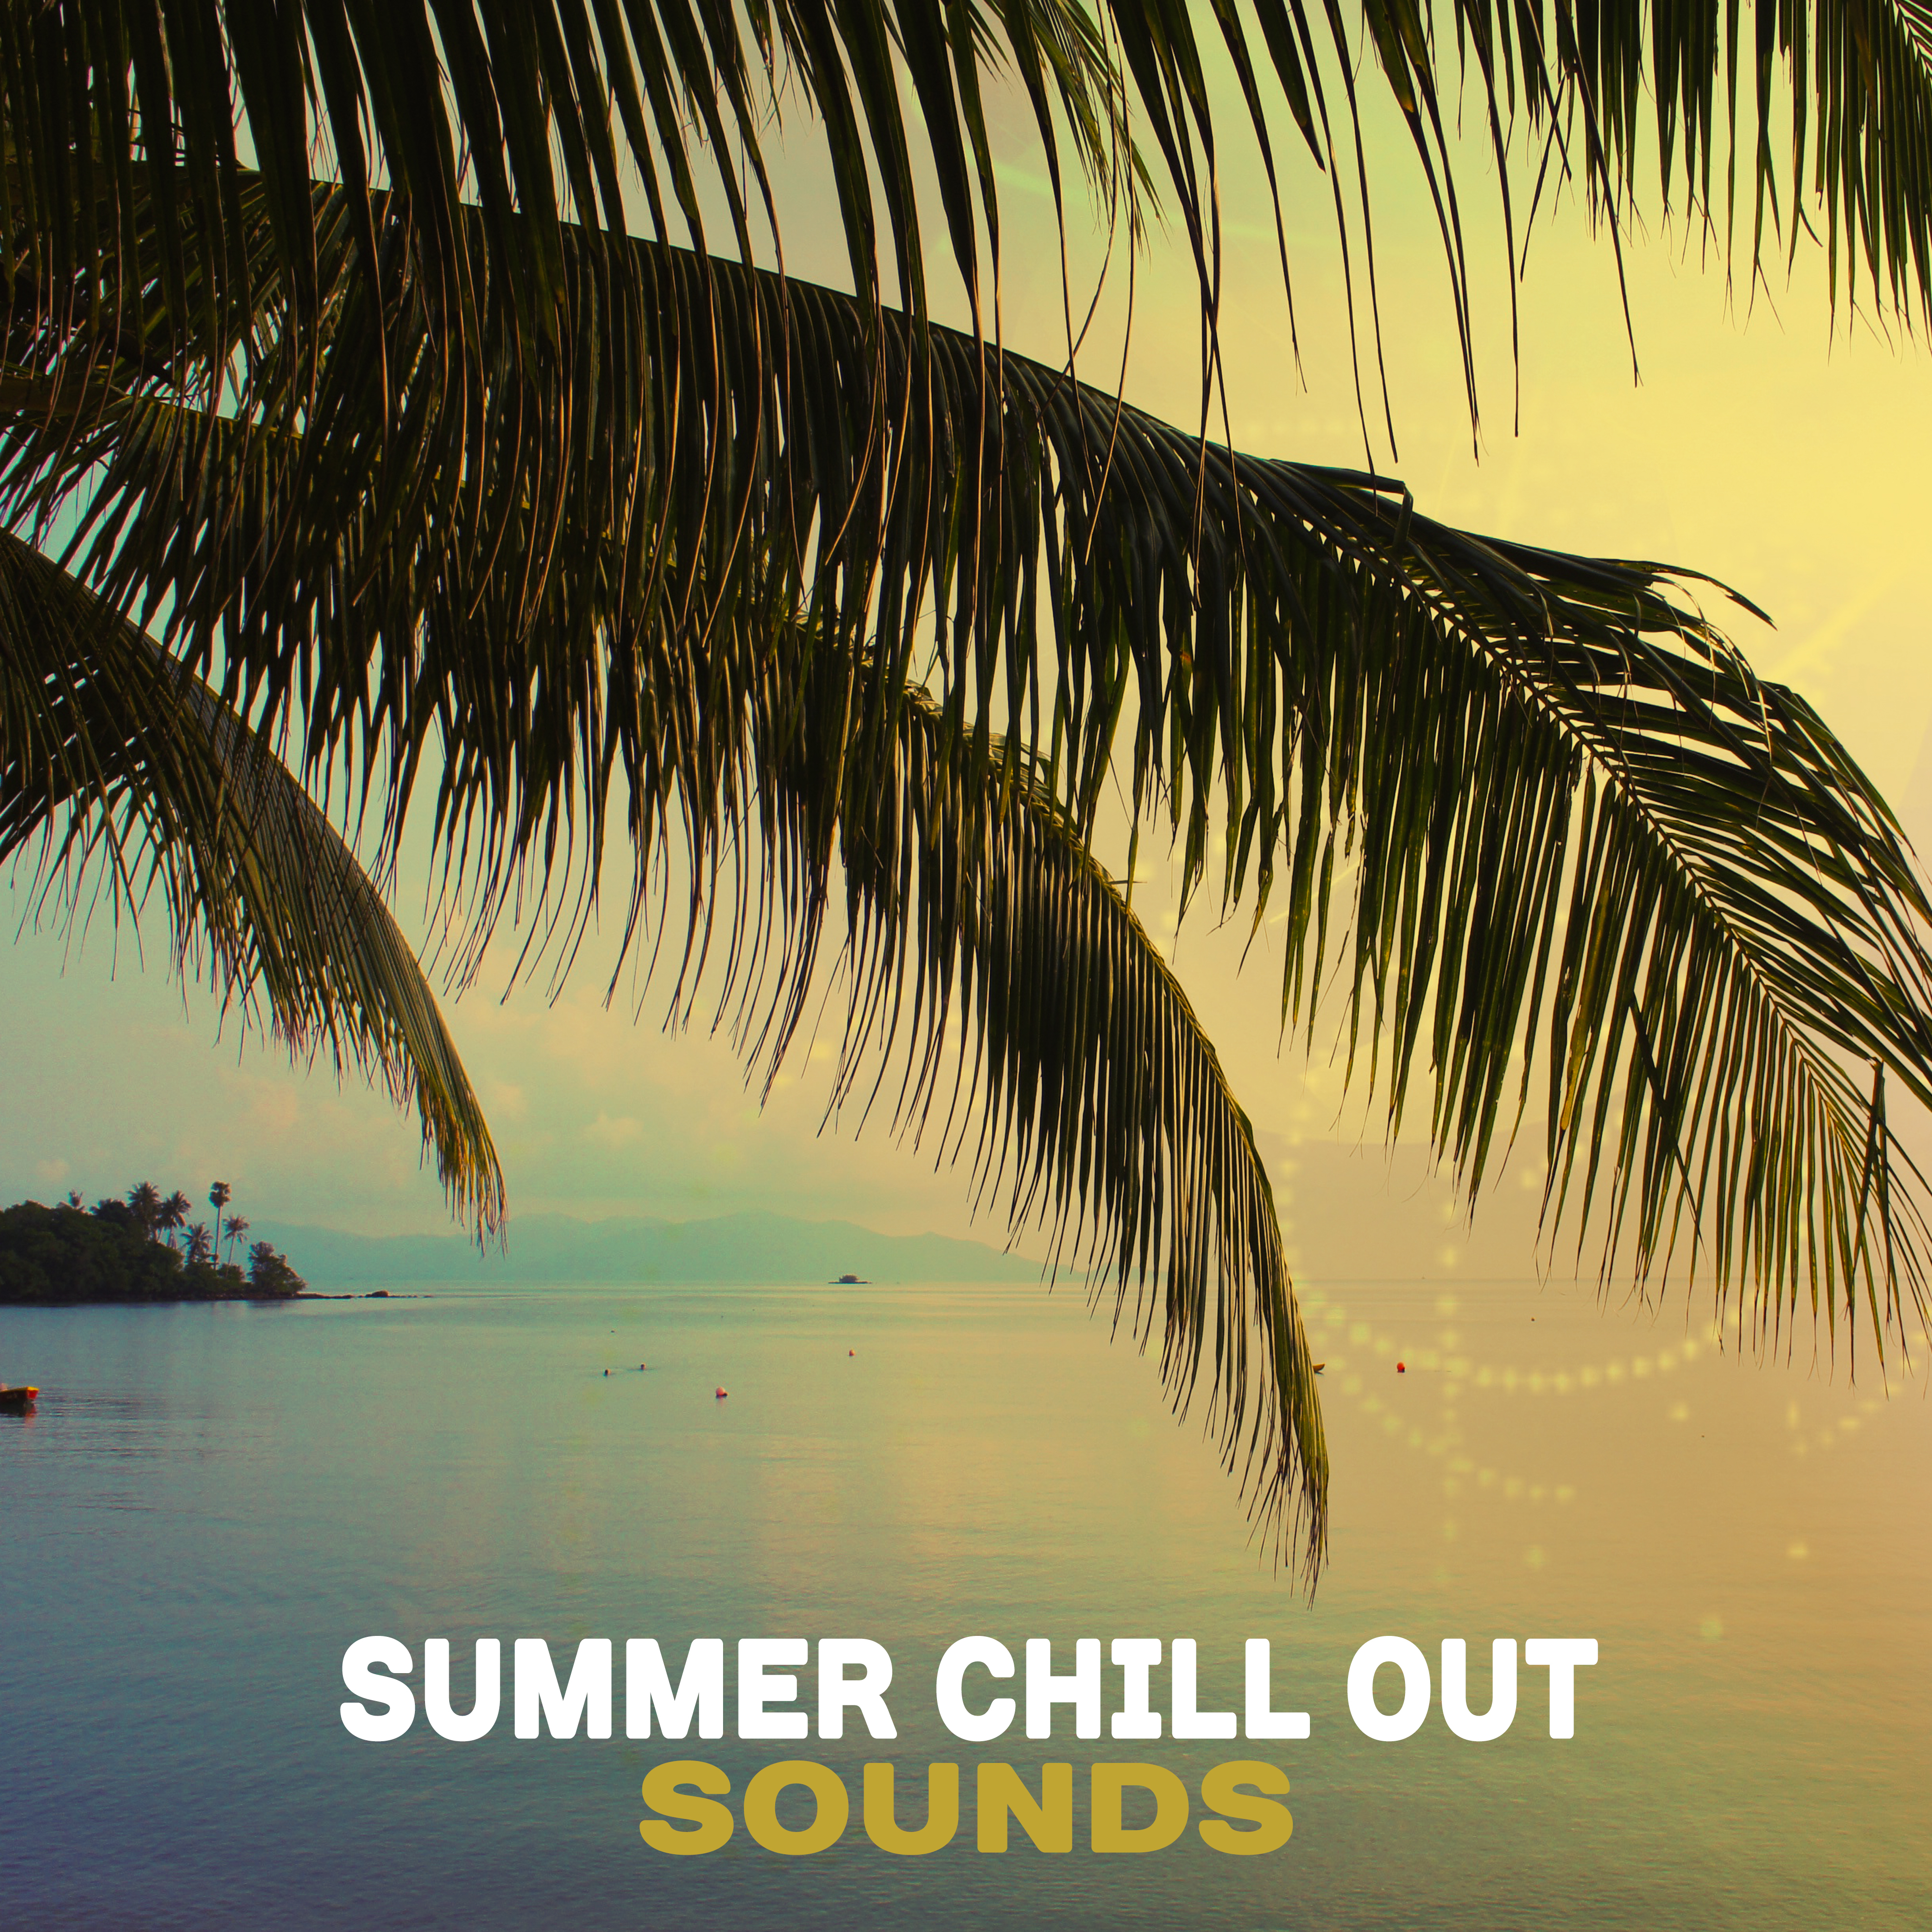 Summer Chill Out Sounds – Beach House Music, Sensual Sounds, Chill & Relax, Island Rest